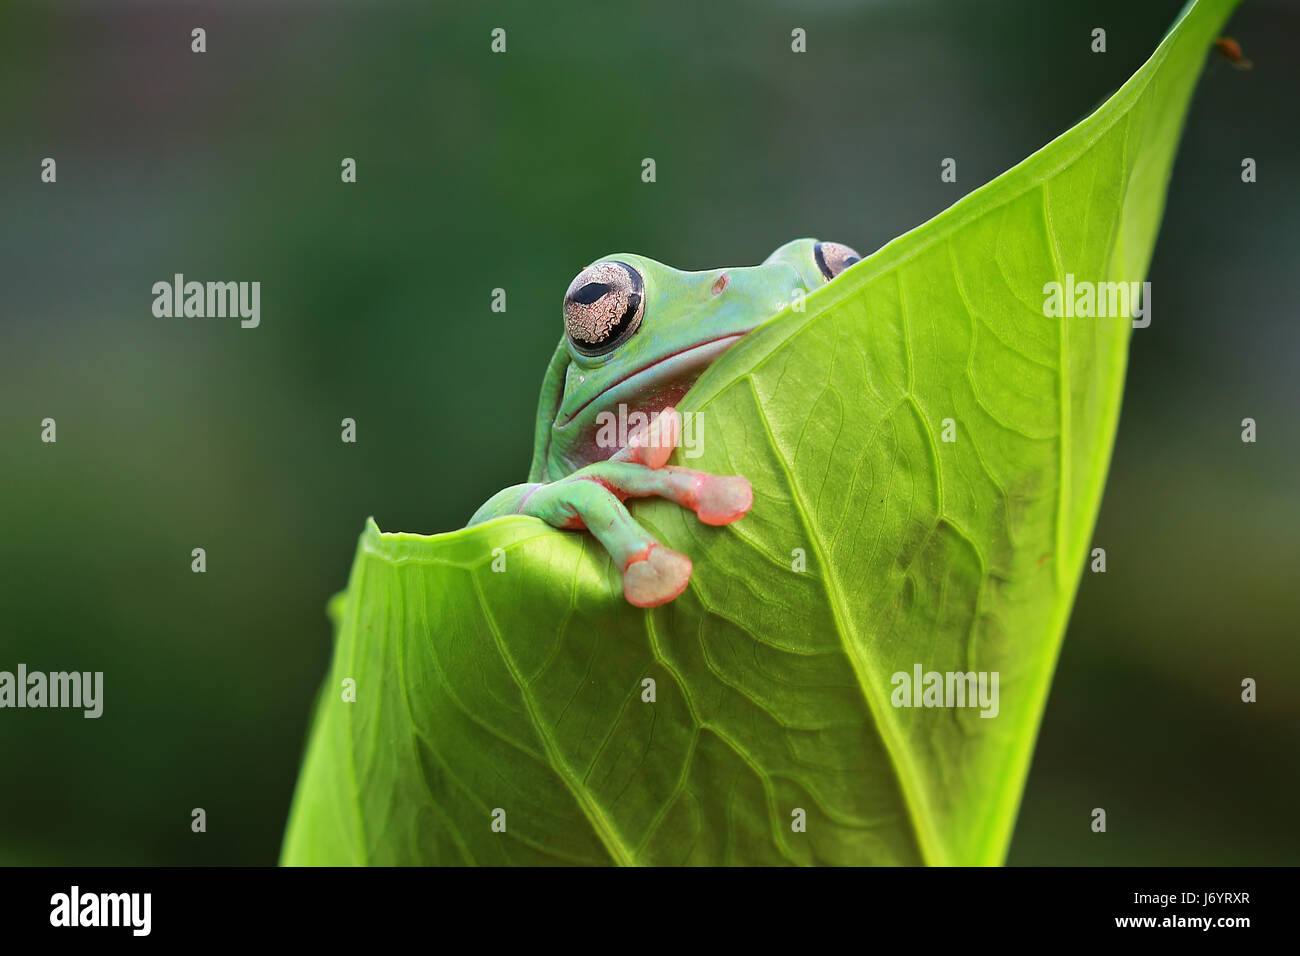 Dumpy frog on a leaf, Indonesia Stock Photo